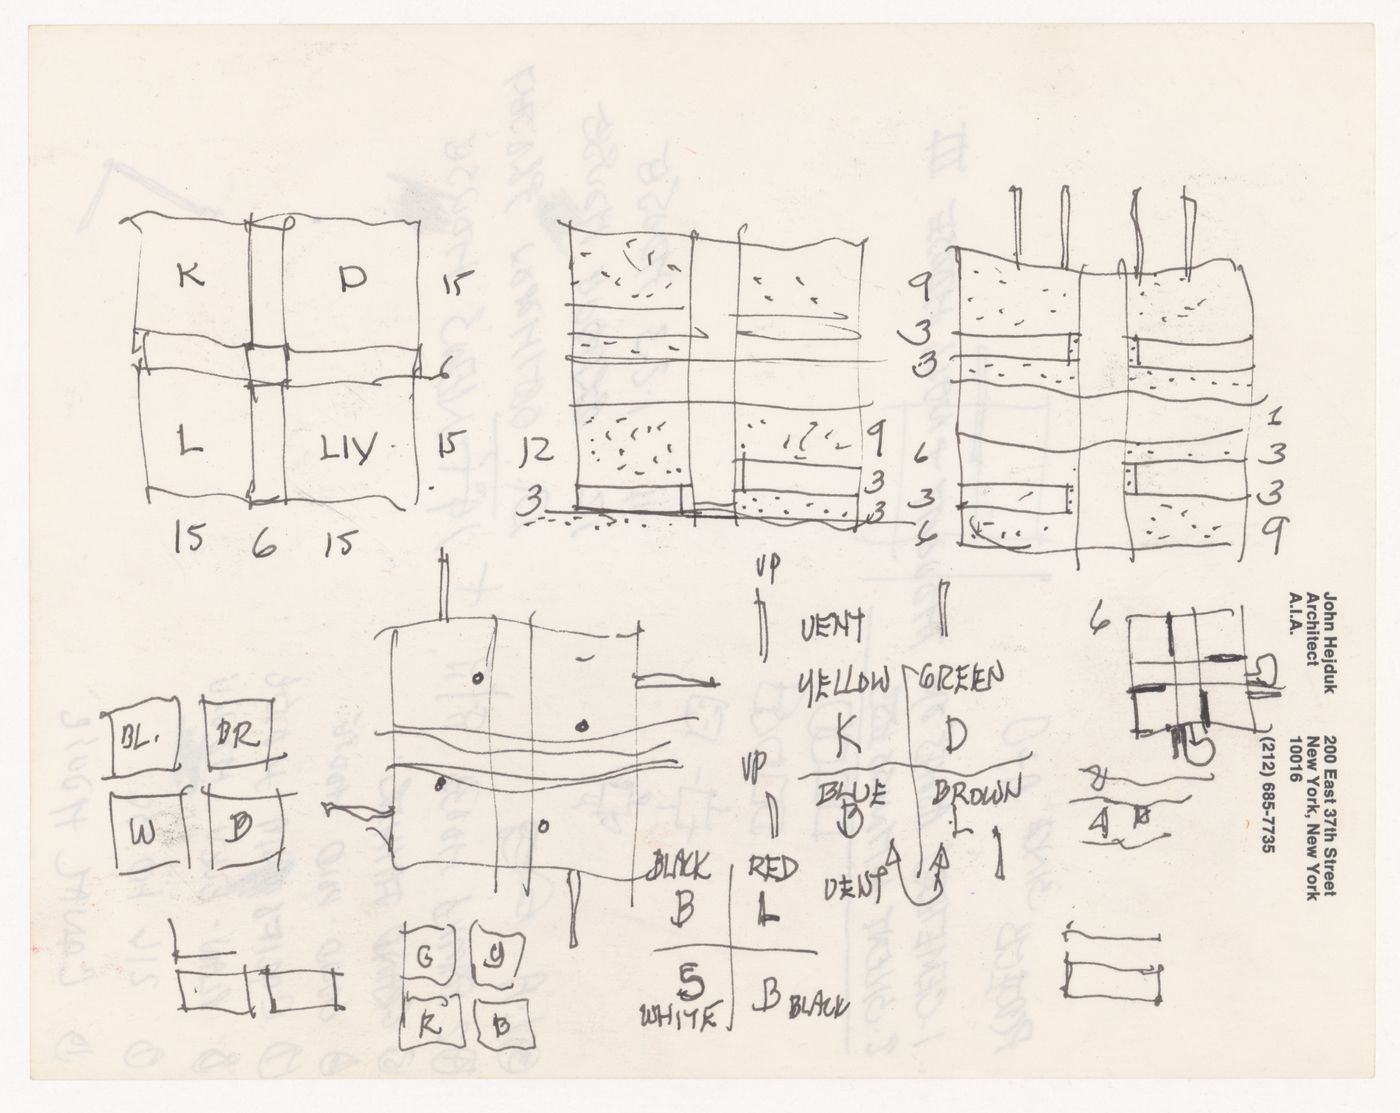 Sketches and notes for Todre House